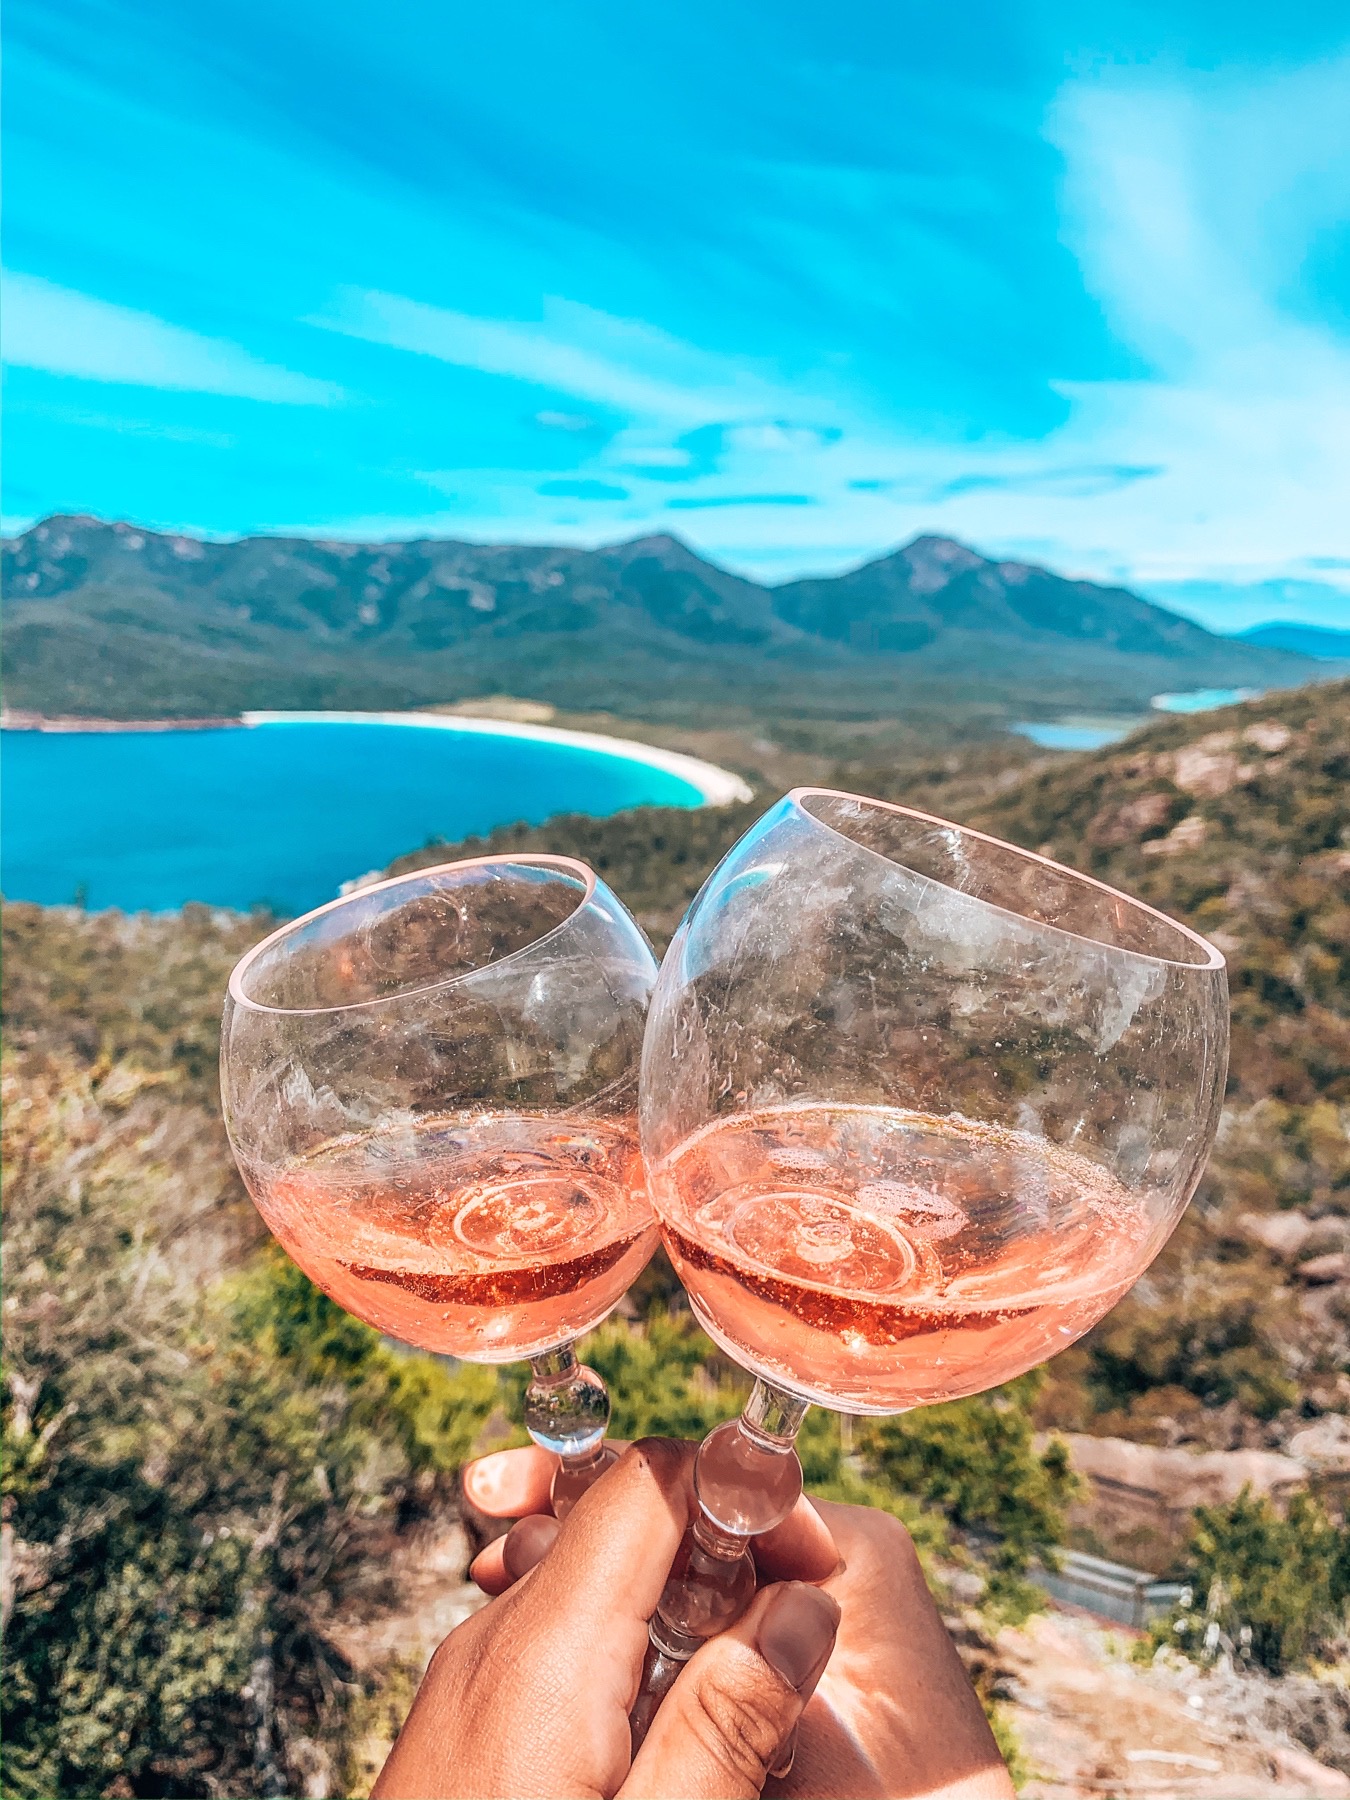 Freycinet WIne Glass Bay - Two wine glasses of Rosé clinking with wineglass bay visible through the glass - Lap of Tasmania